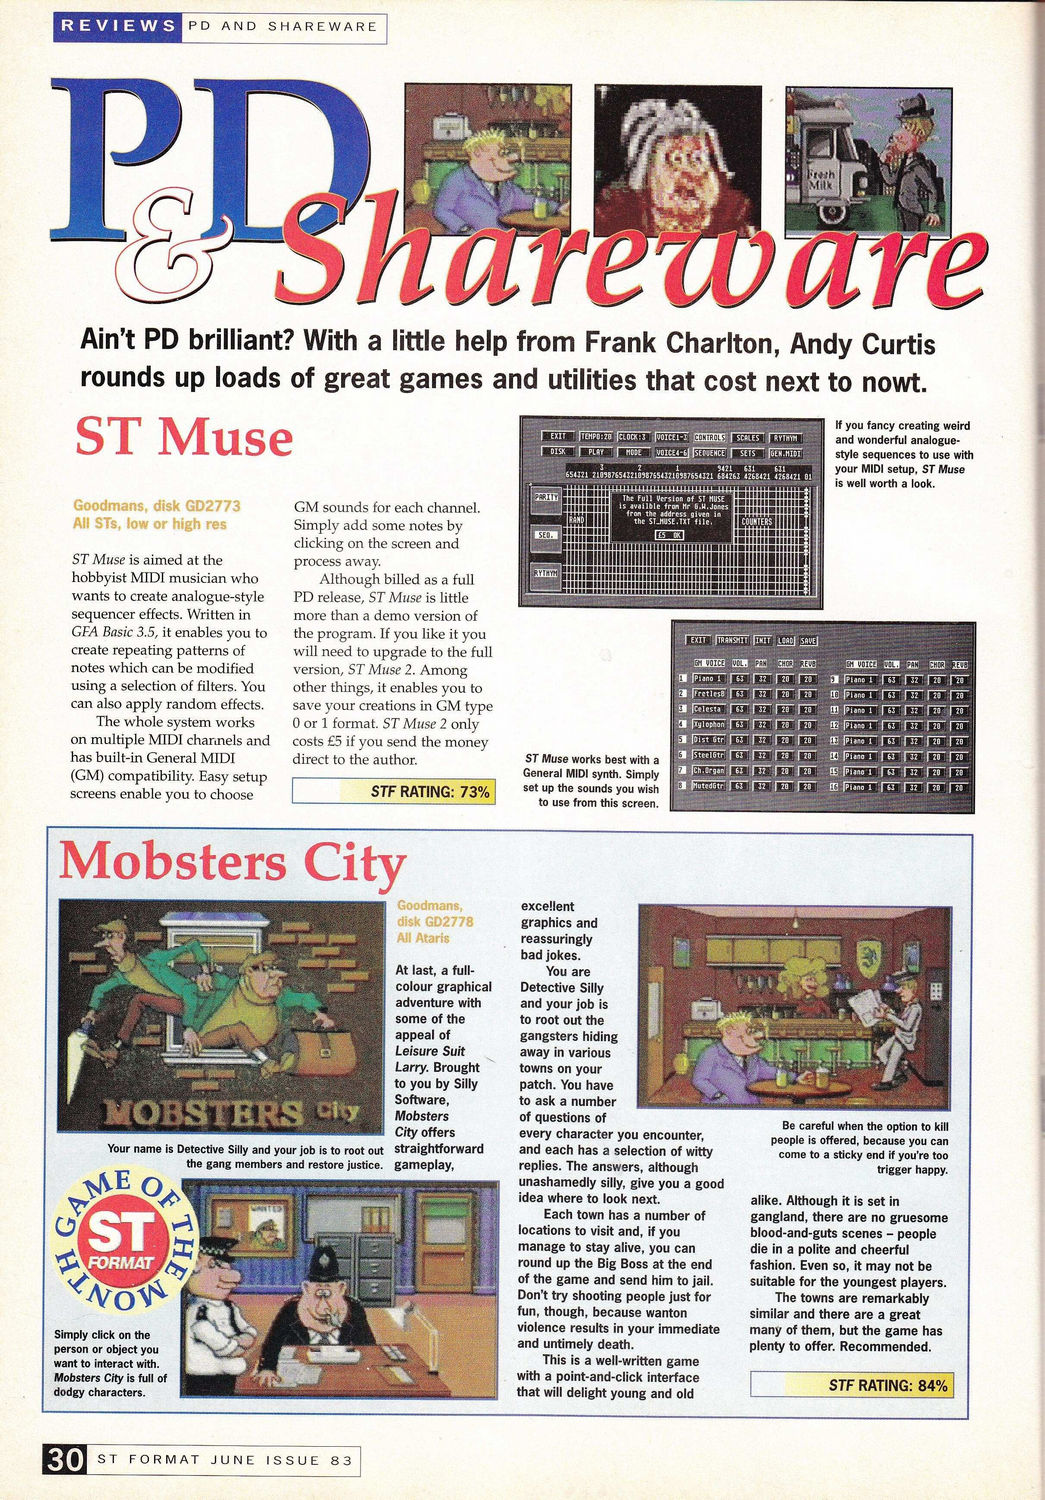 Mobsters City is one of Deano's favorite creations. This title even became 'Game of the Month' in ST Format magazine issue 83. 